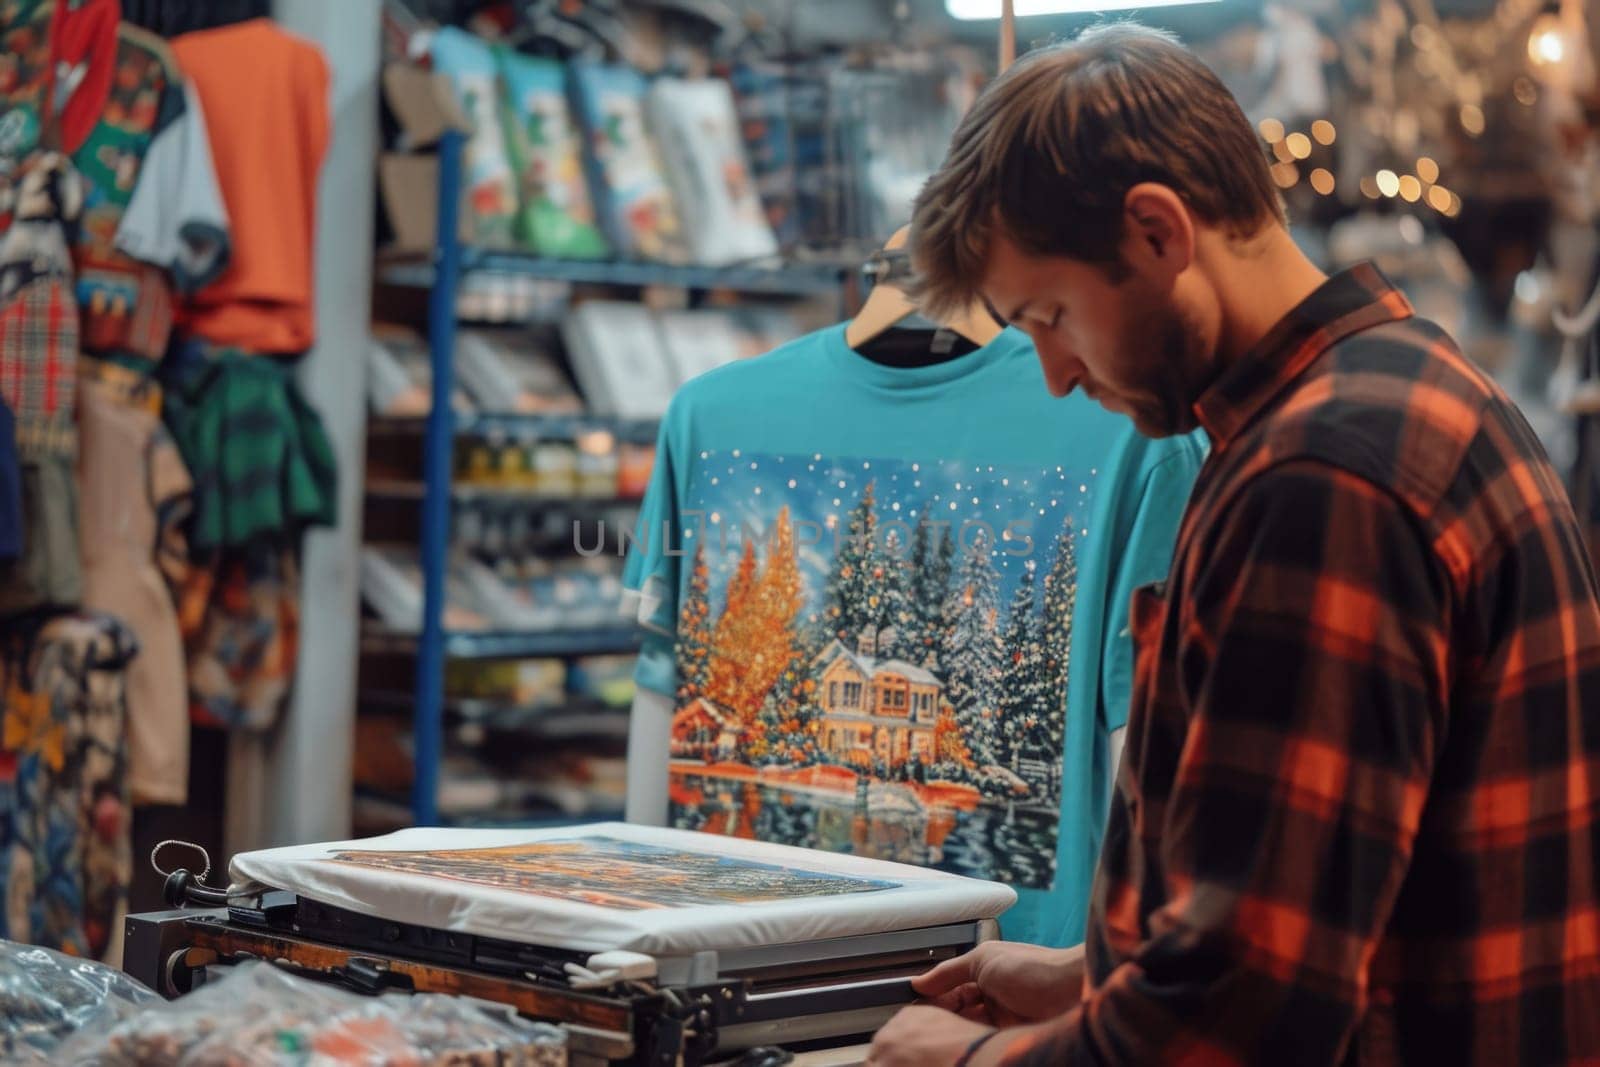 A person with focus applies a unique design on a t-shirt through the printing method, embodying creativity in wearable art.